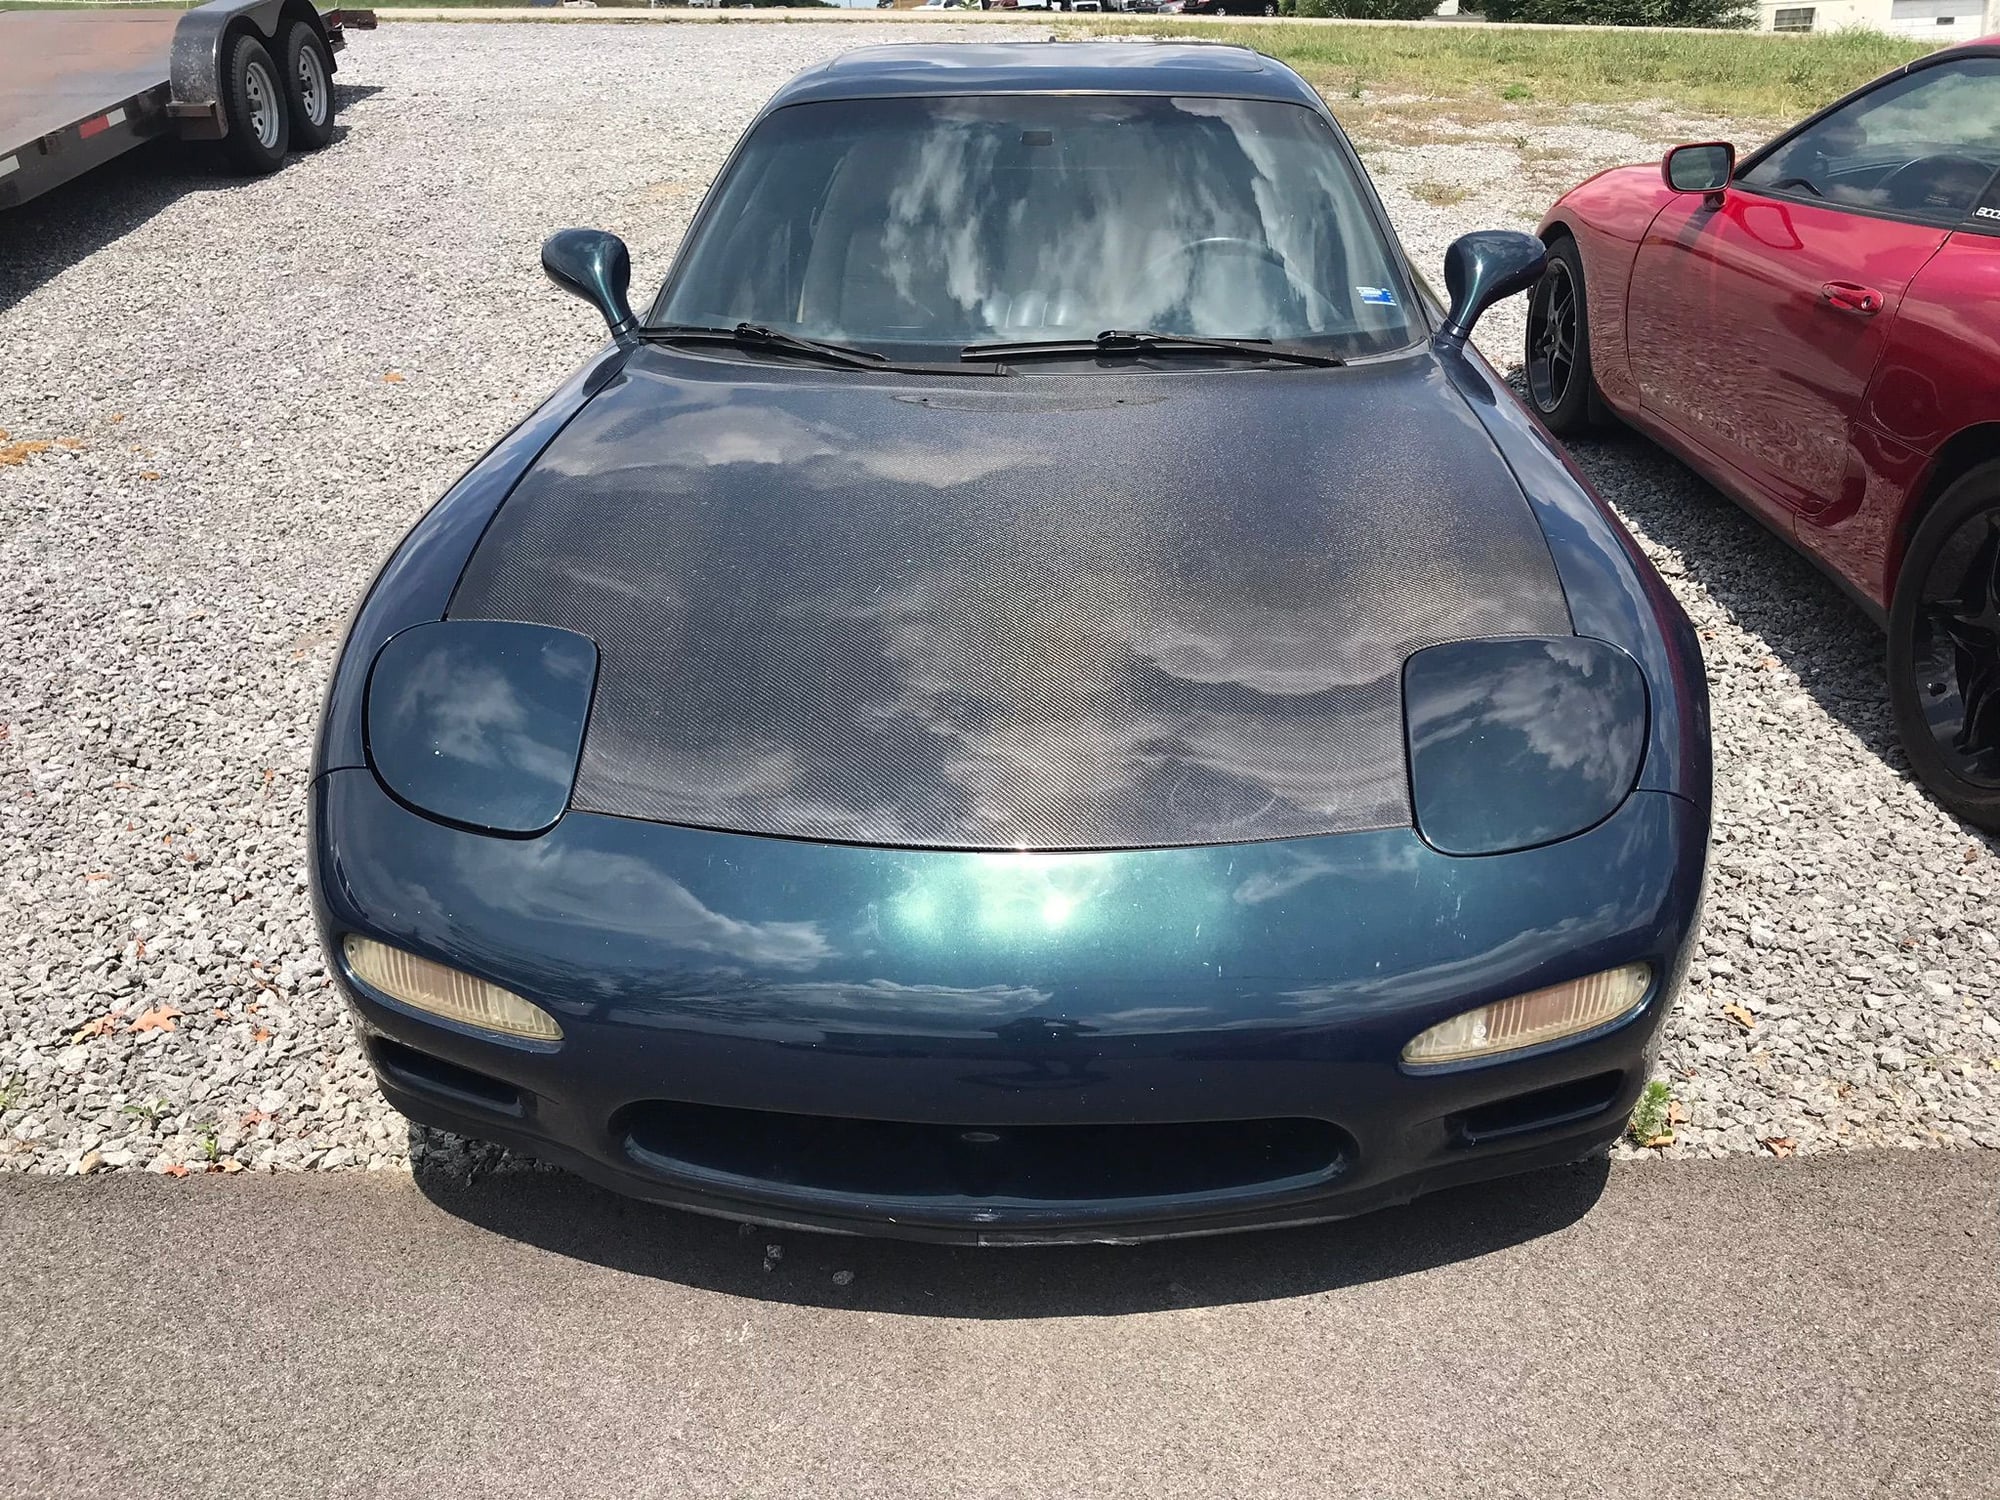 Accessories - For Sale-FD Carbon Fiber Hood - Used - 1993 to 2002 Mazda RX-7 - North Ft. Worth, TX 75028, United States